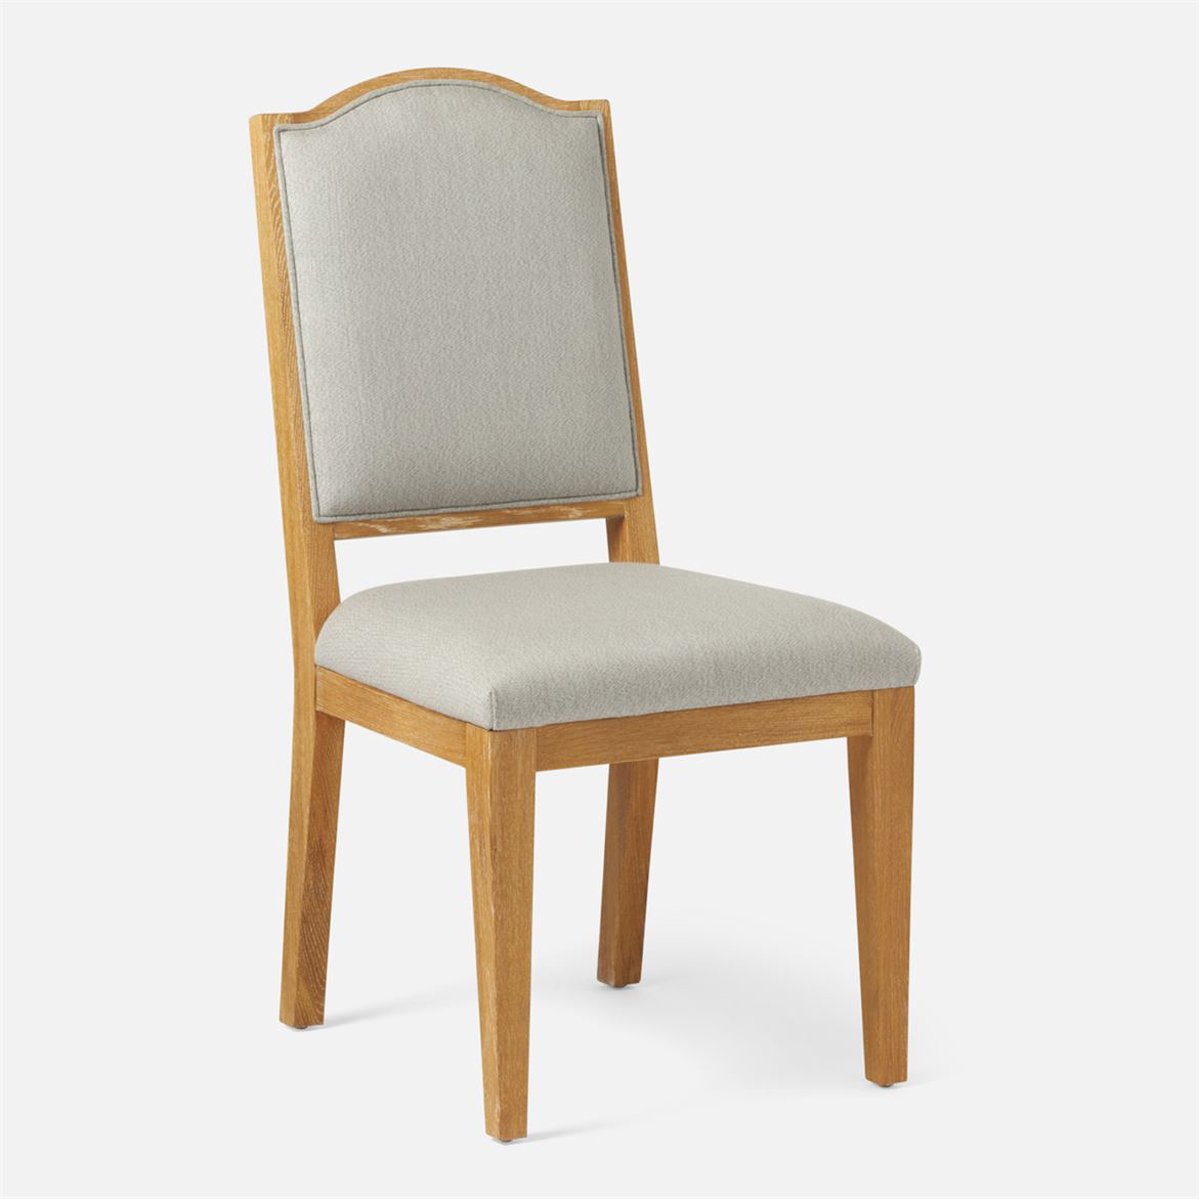 Made Goods Salem Upholstered Dining Chair in Kern Fabric